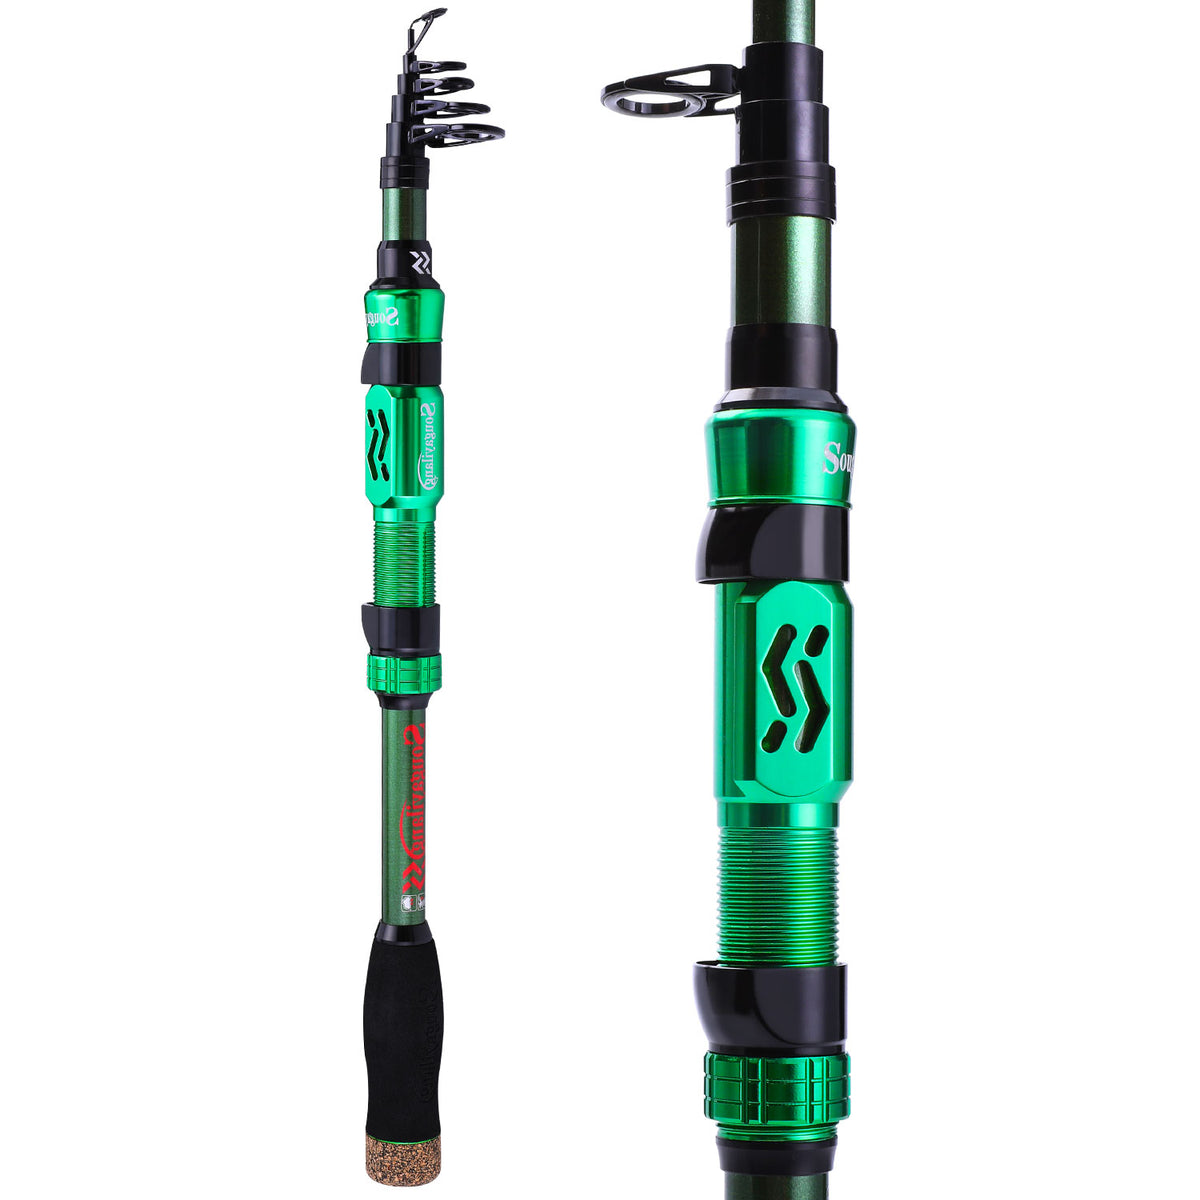 Travel Fishing Rods, Telescopic Fishing Rods, Ceramic Rings, Travel Fishing  Rod for Freshwater And Saltwater Trout Fishing - 2.7m